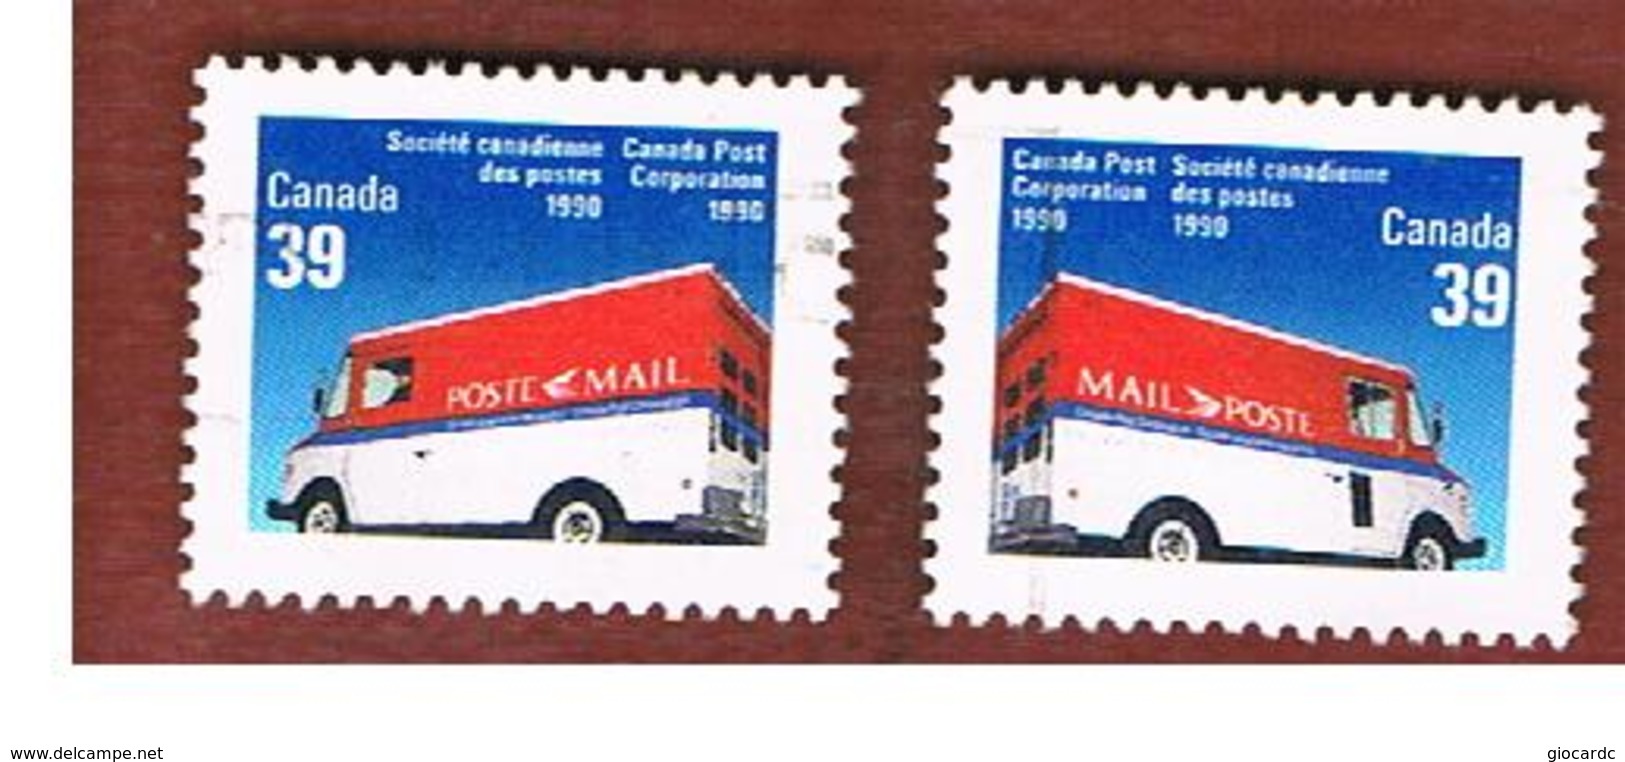 CANADA - SG 1382.1383  - 1990  MAIL VAN: COMPLET SET OF 2    -   USED - Used Stamps